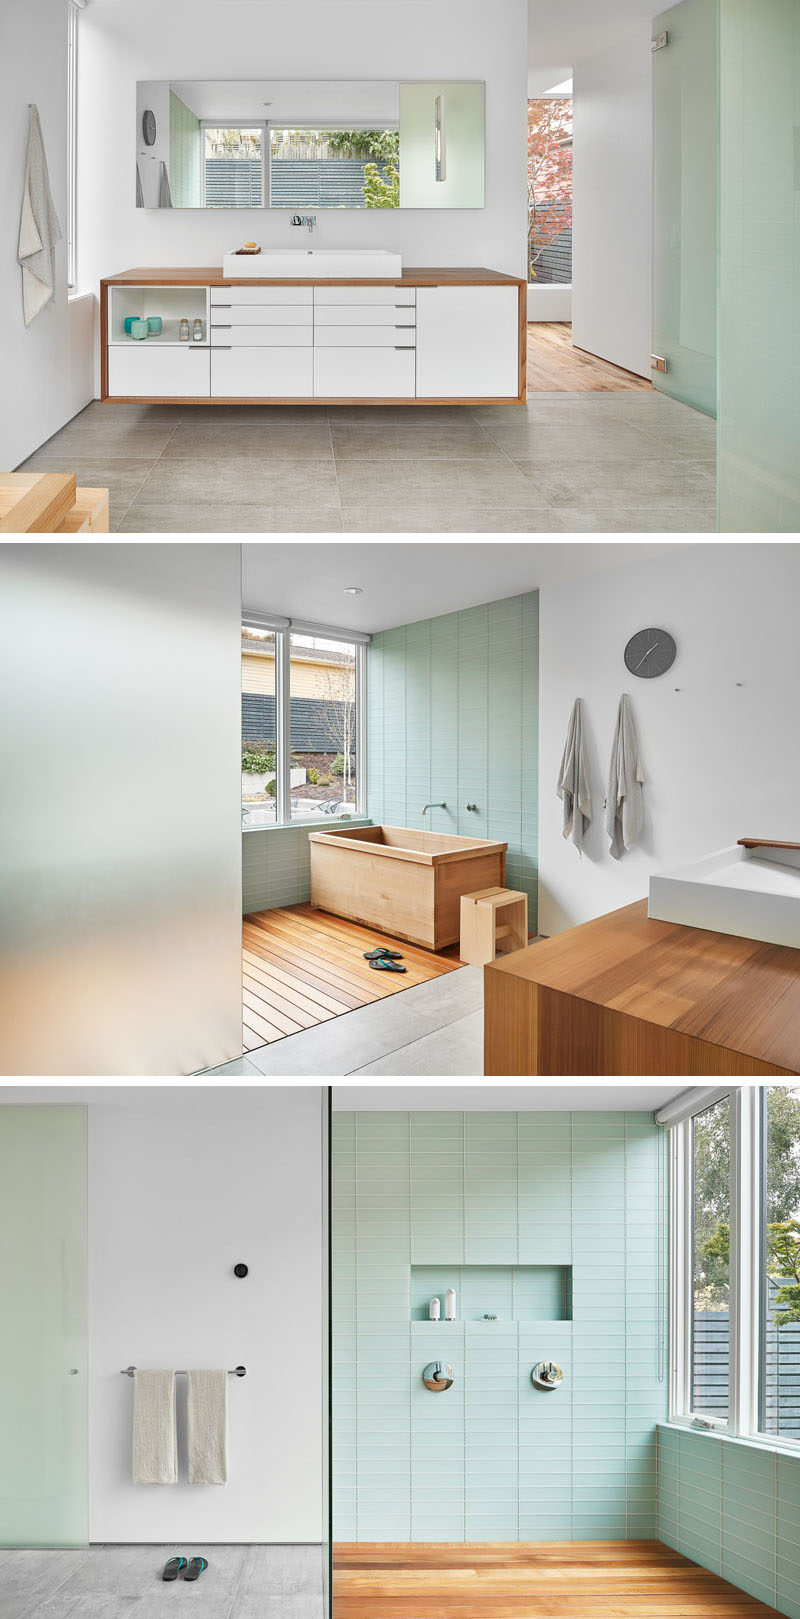 In this bathroom, custom cabinets and the Japanese soaking tub have both been made using Western Red cedar. Pastel green tiles and frosted glass makes the bathroom have a relaxed feeling.